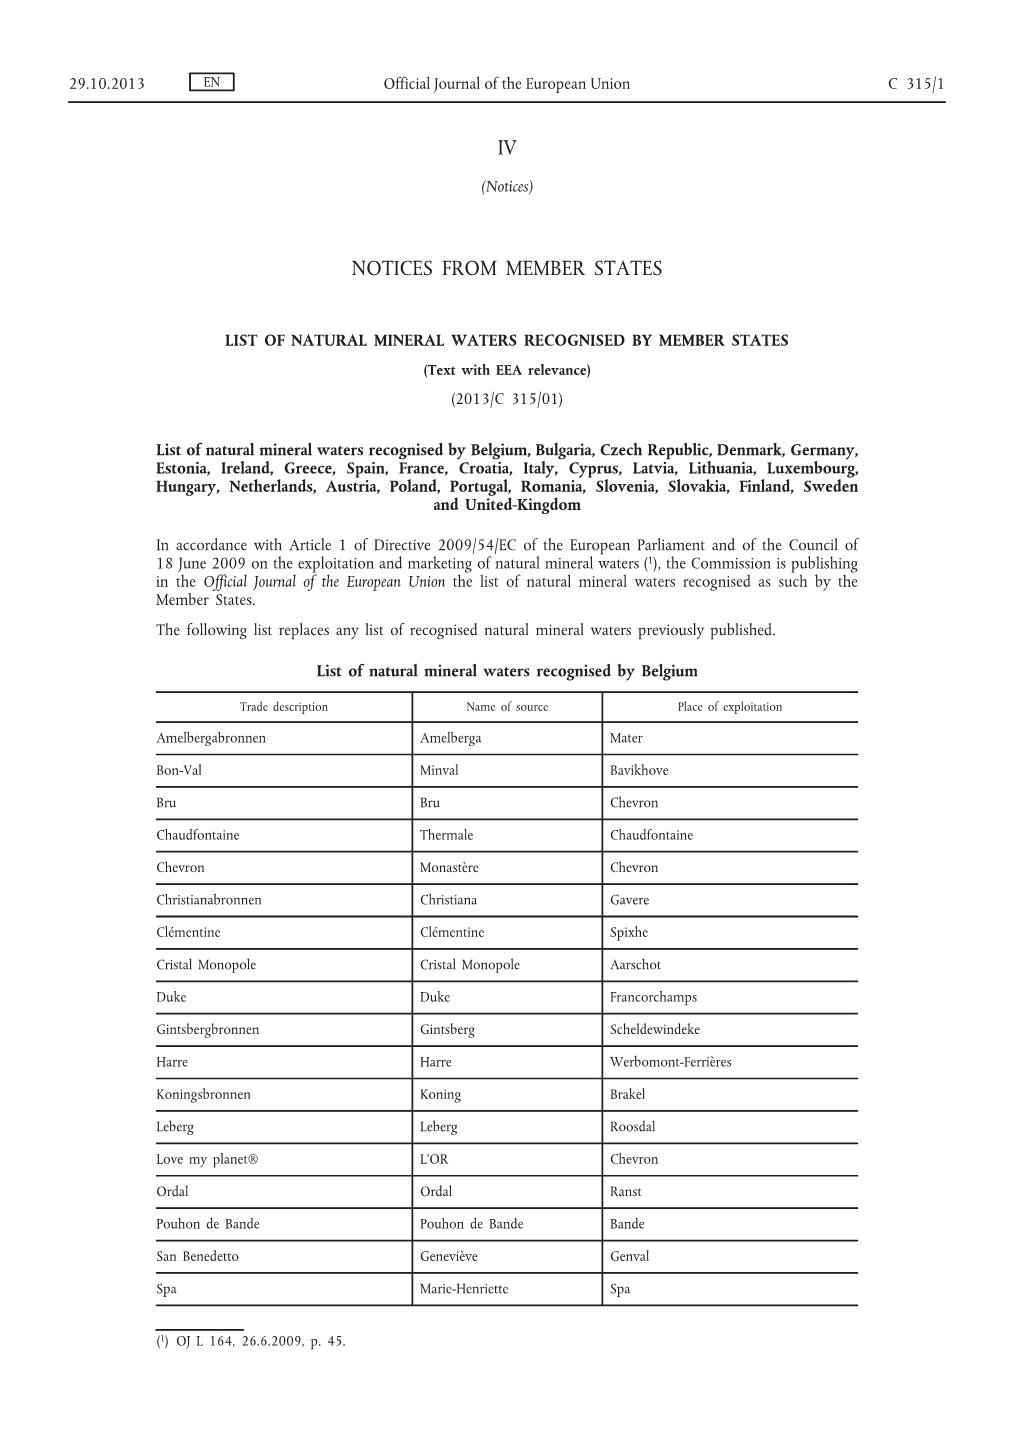 List of Natural Mineral Waters Recognised by Member Statestext